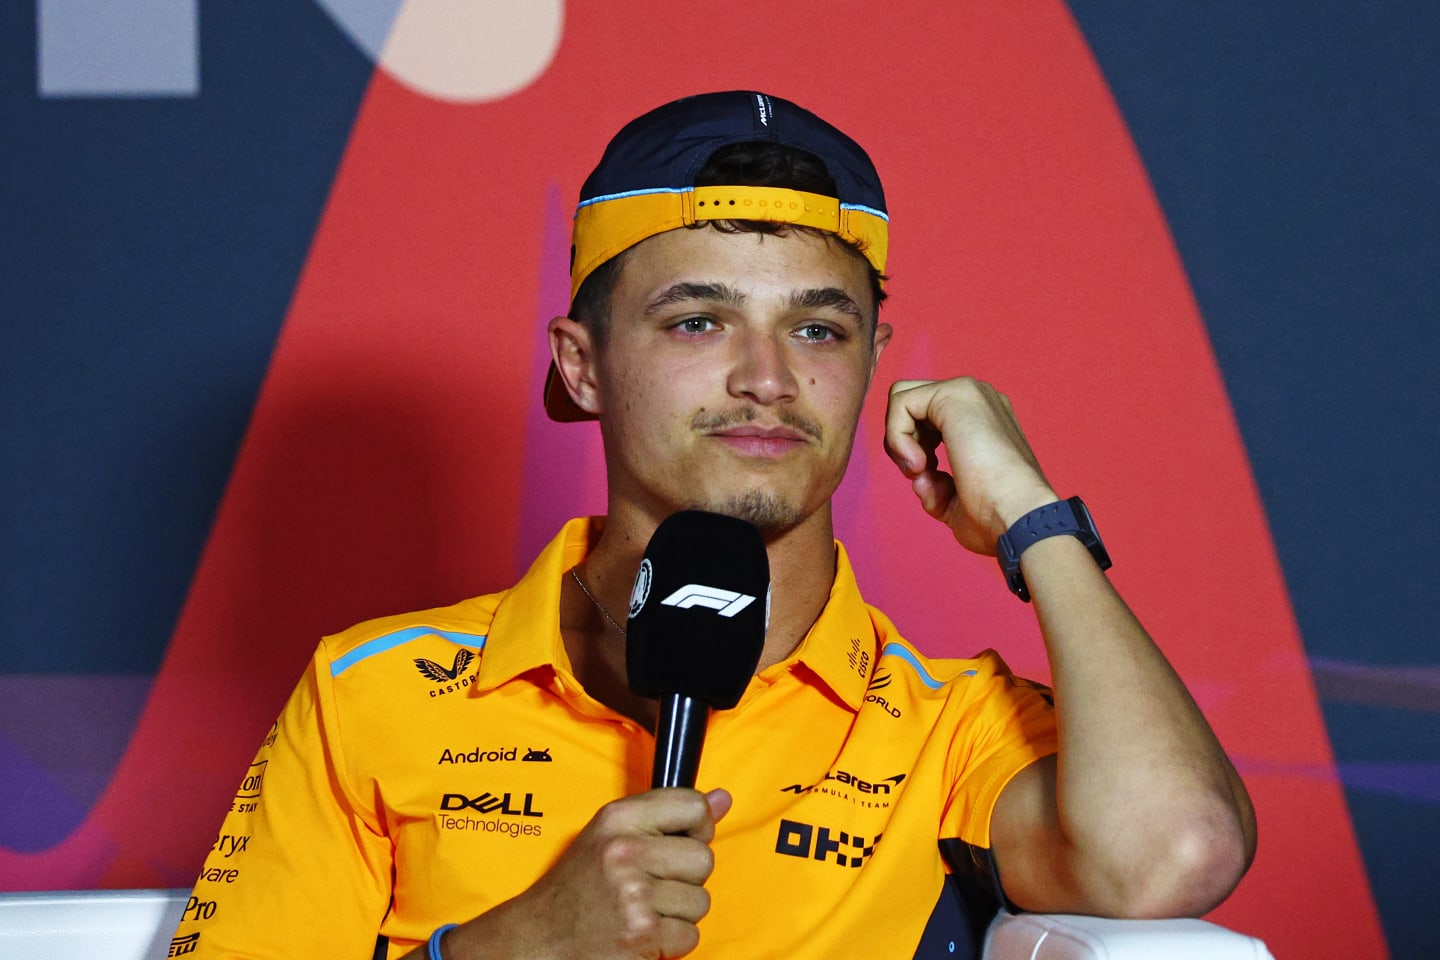 BAHRAIN, BAHRAIN - FEBRUARY 28: Lando Norris of Great Britain and McLaren attends the Drivers Press Conference during previews ahead of the F1 Grand Prix of Bahrain at Bahrain International Circuit on February 28, 2024 in Bahrain, Bahrain. (Photo by Clive Rose/Getty Images)